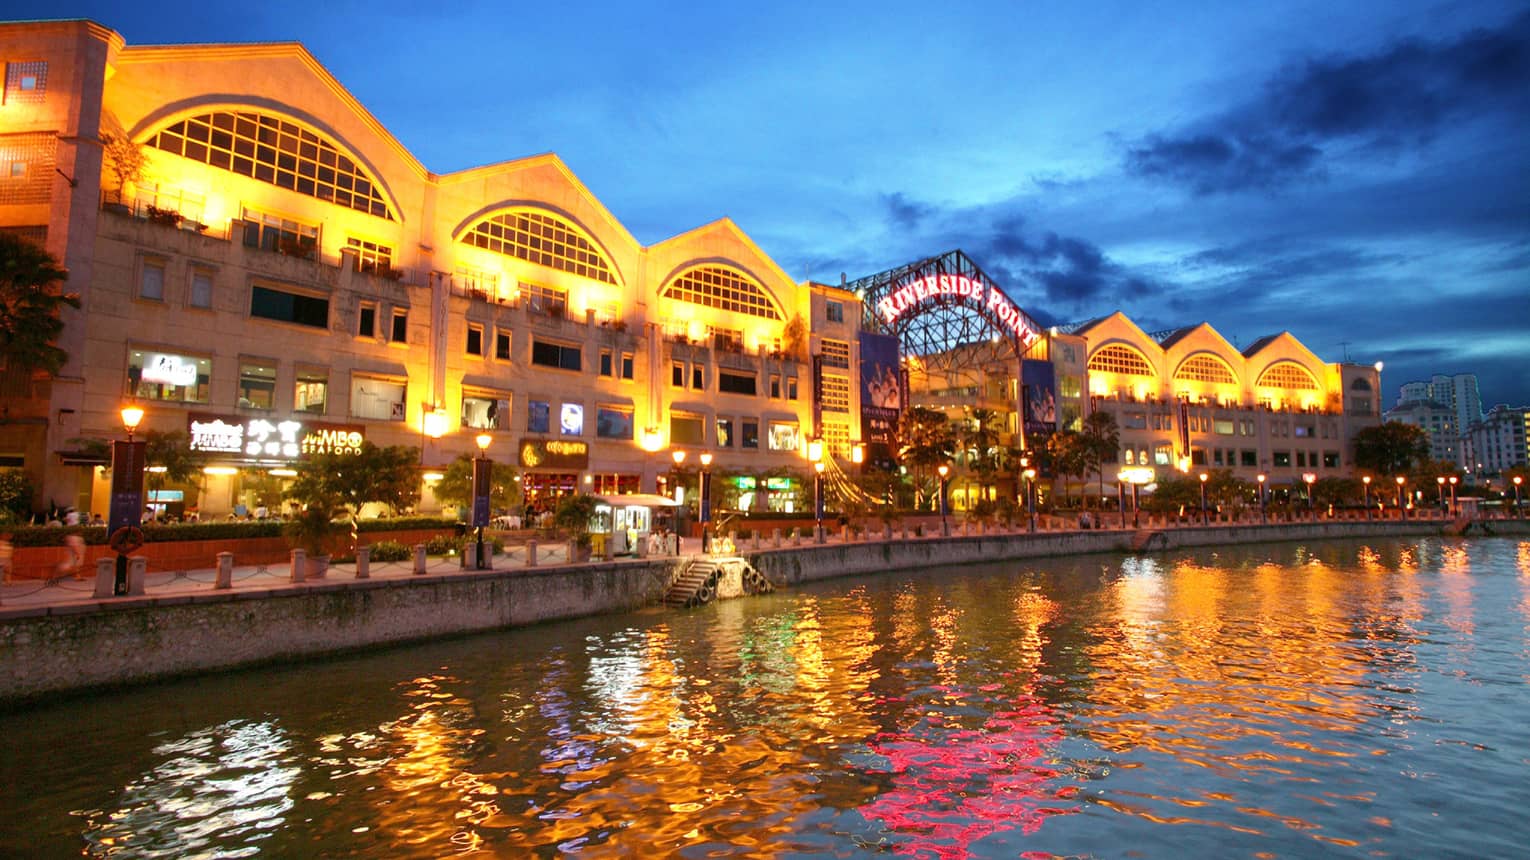 ,A shopping center by the water lit up at night